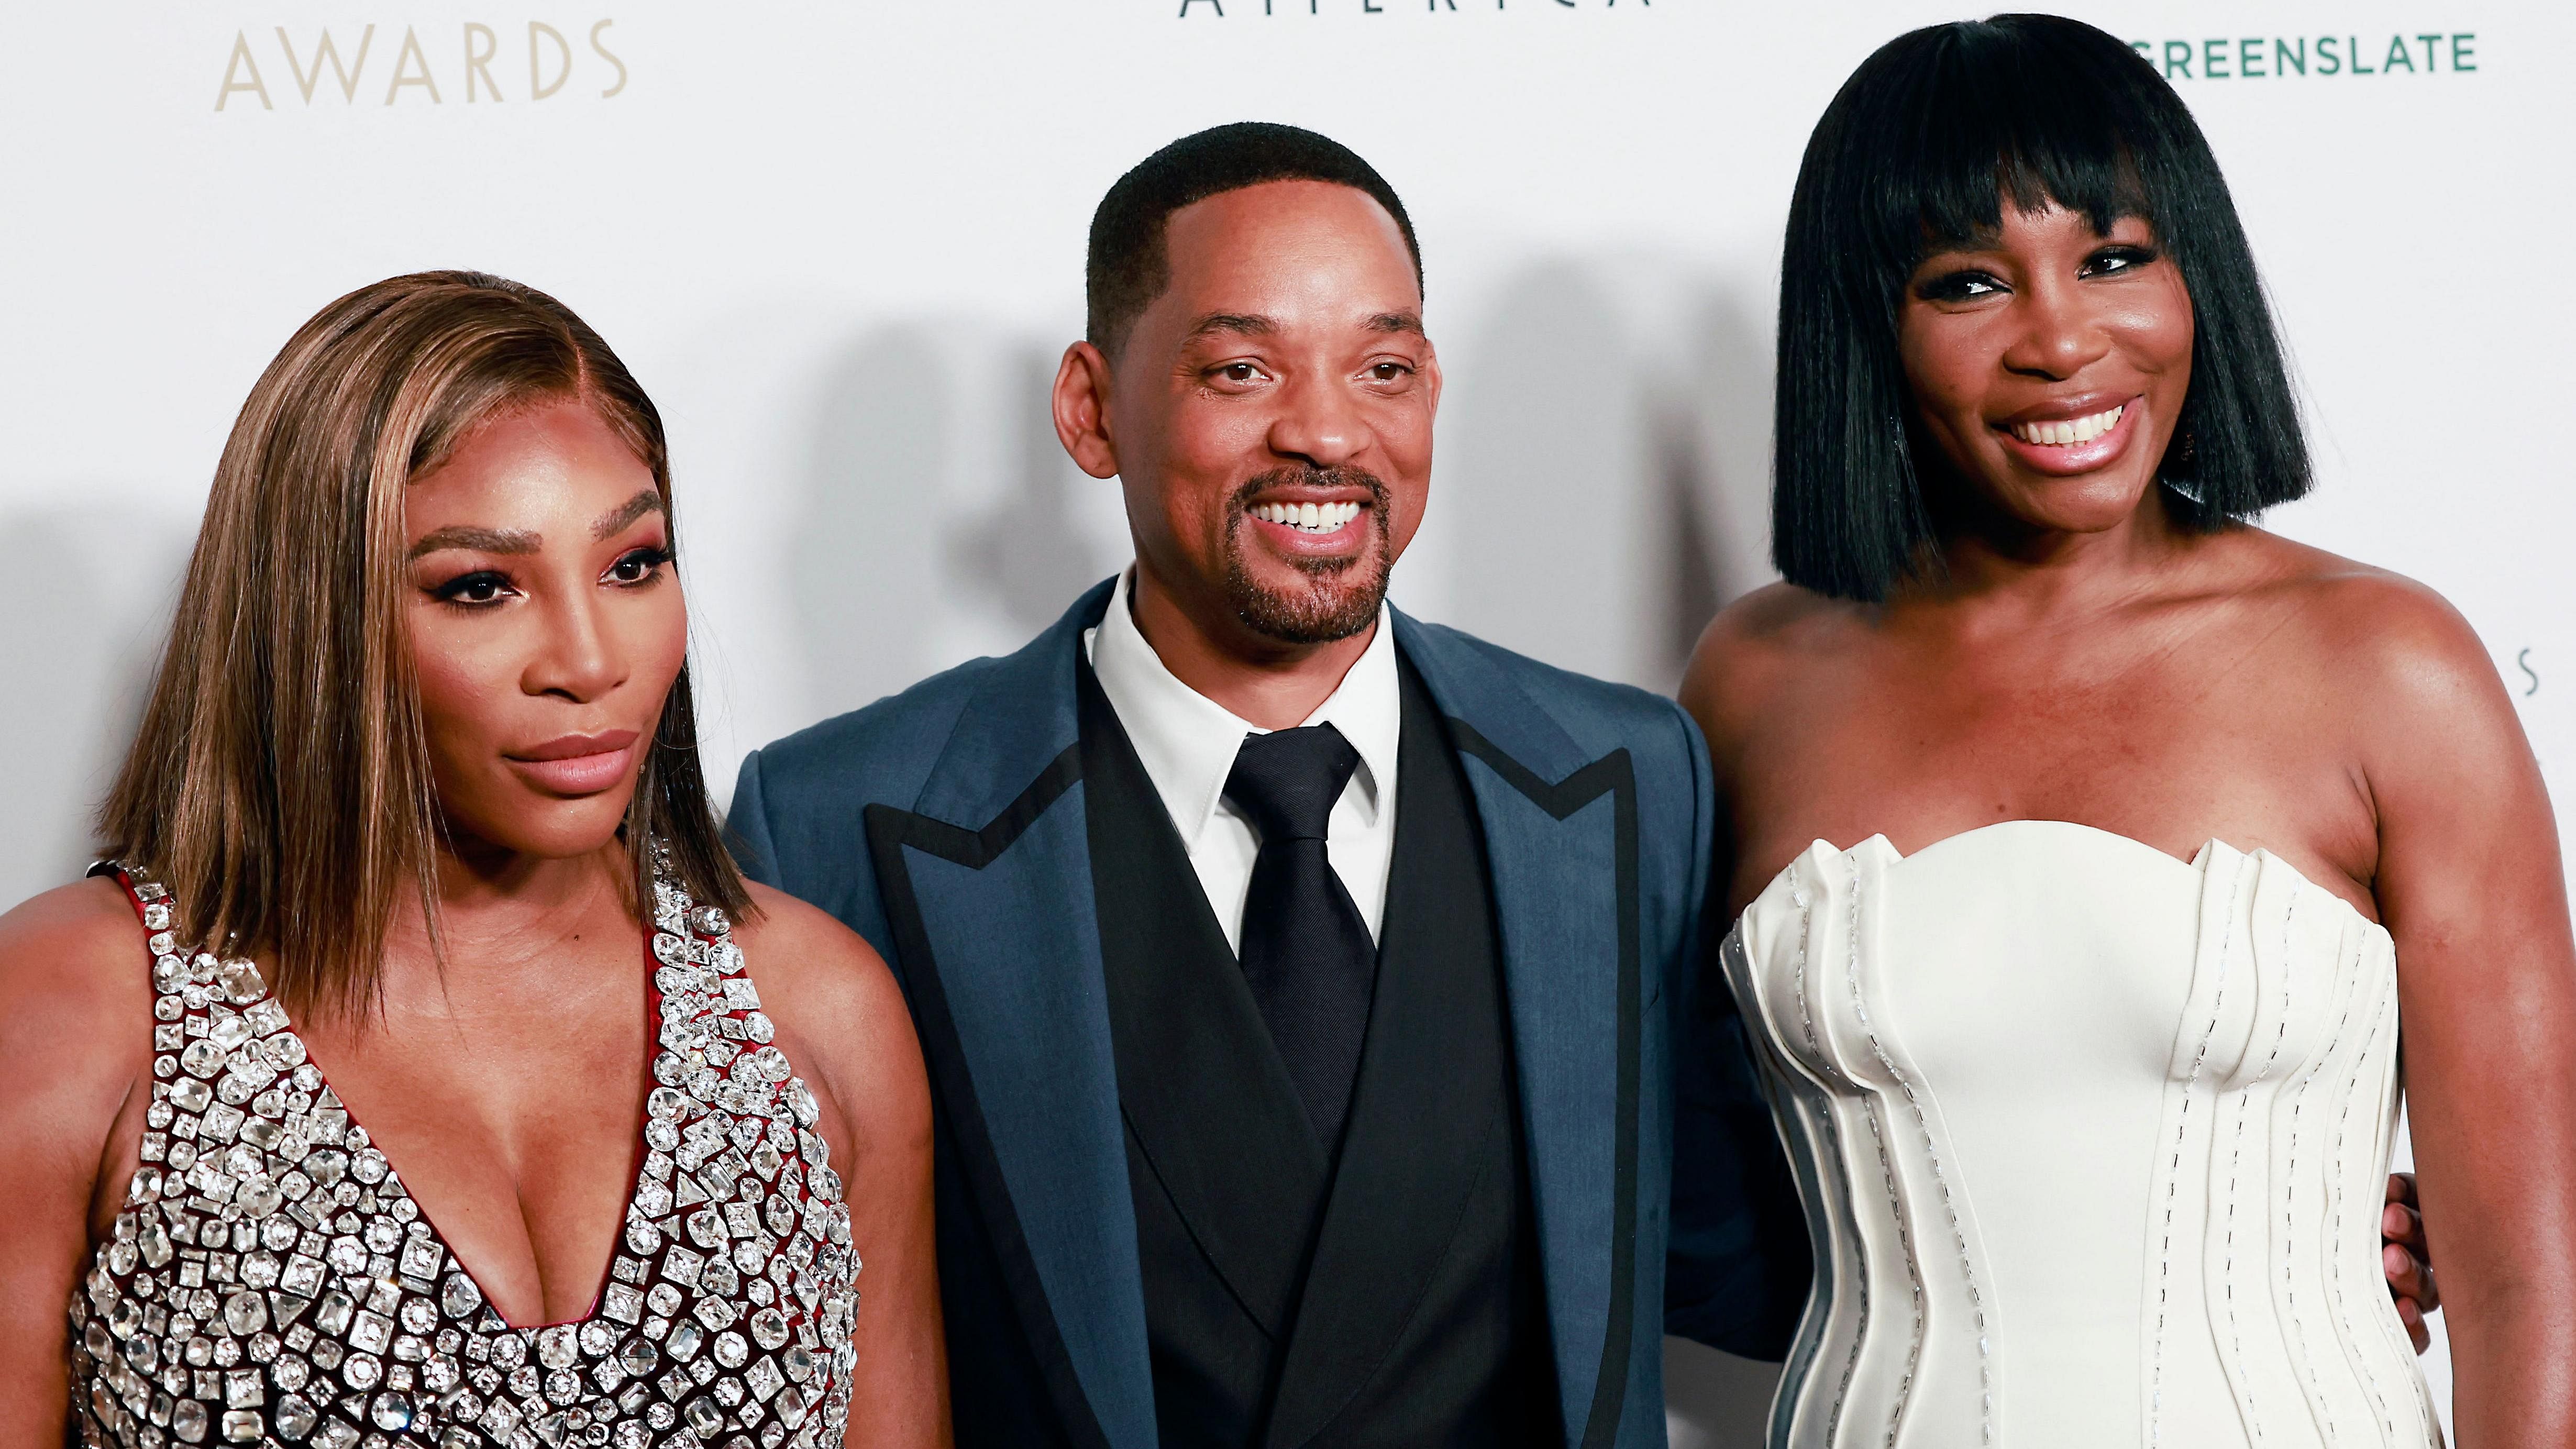 (L-R) Serena Williams, Will Smith and Venus Williams arrive for the 33rd Annual Producers Guild Awards at the Fairmont Century Plaza. Credit: AFP Photo